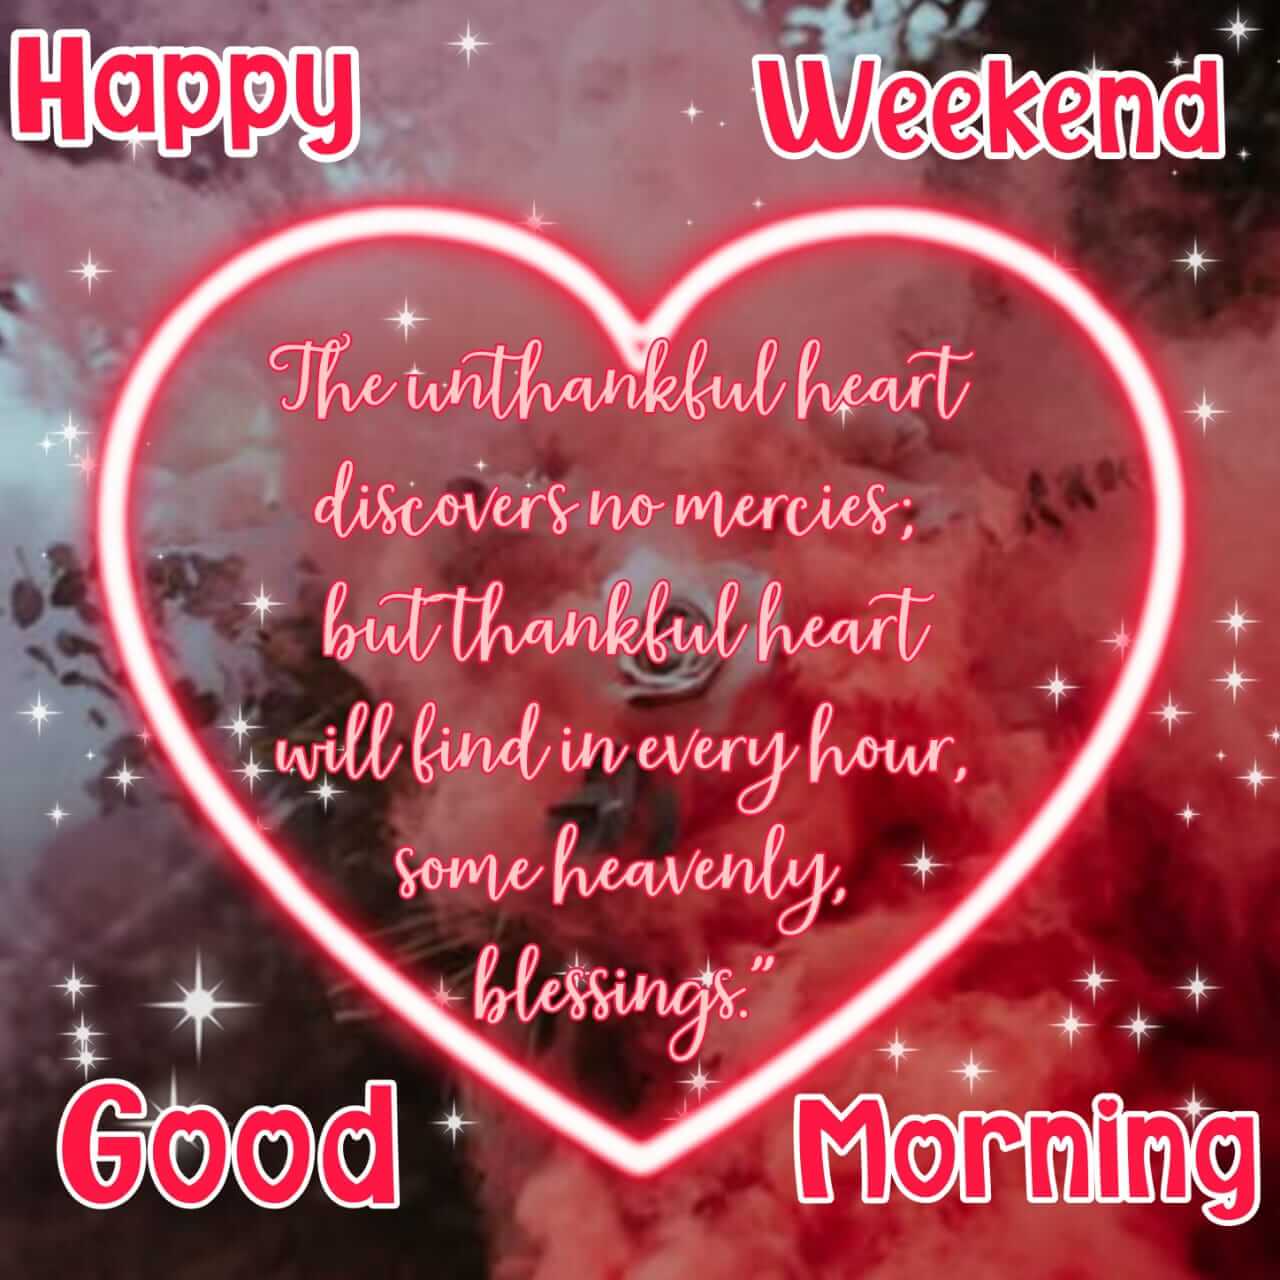 Good Morning Happy Weekend image free download wishes image